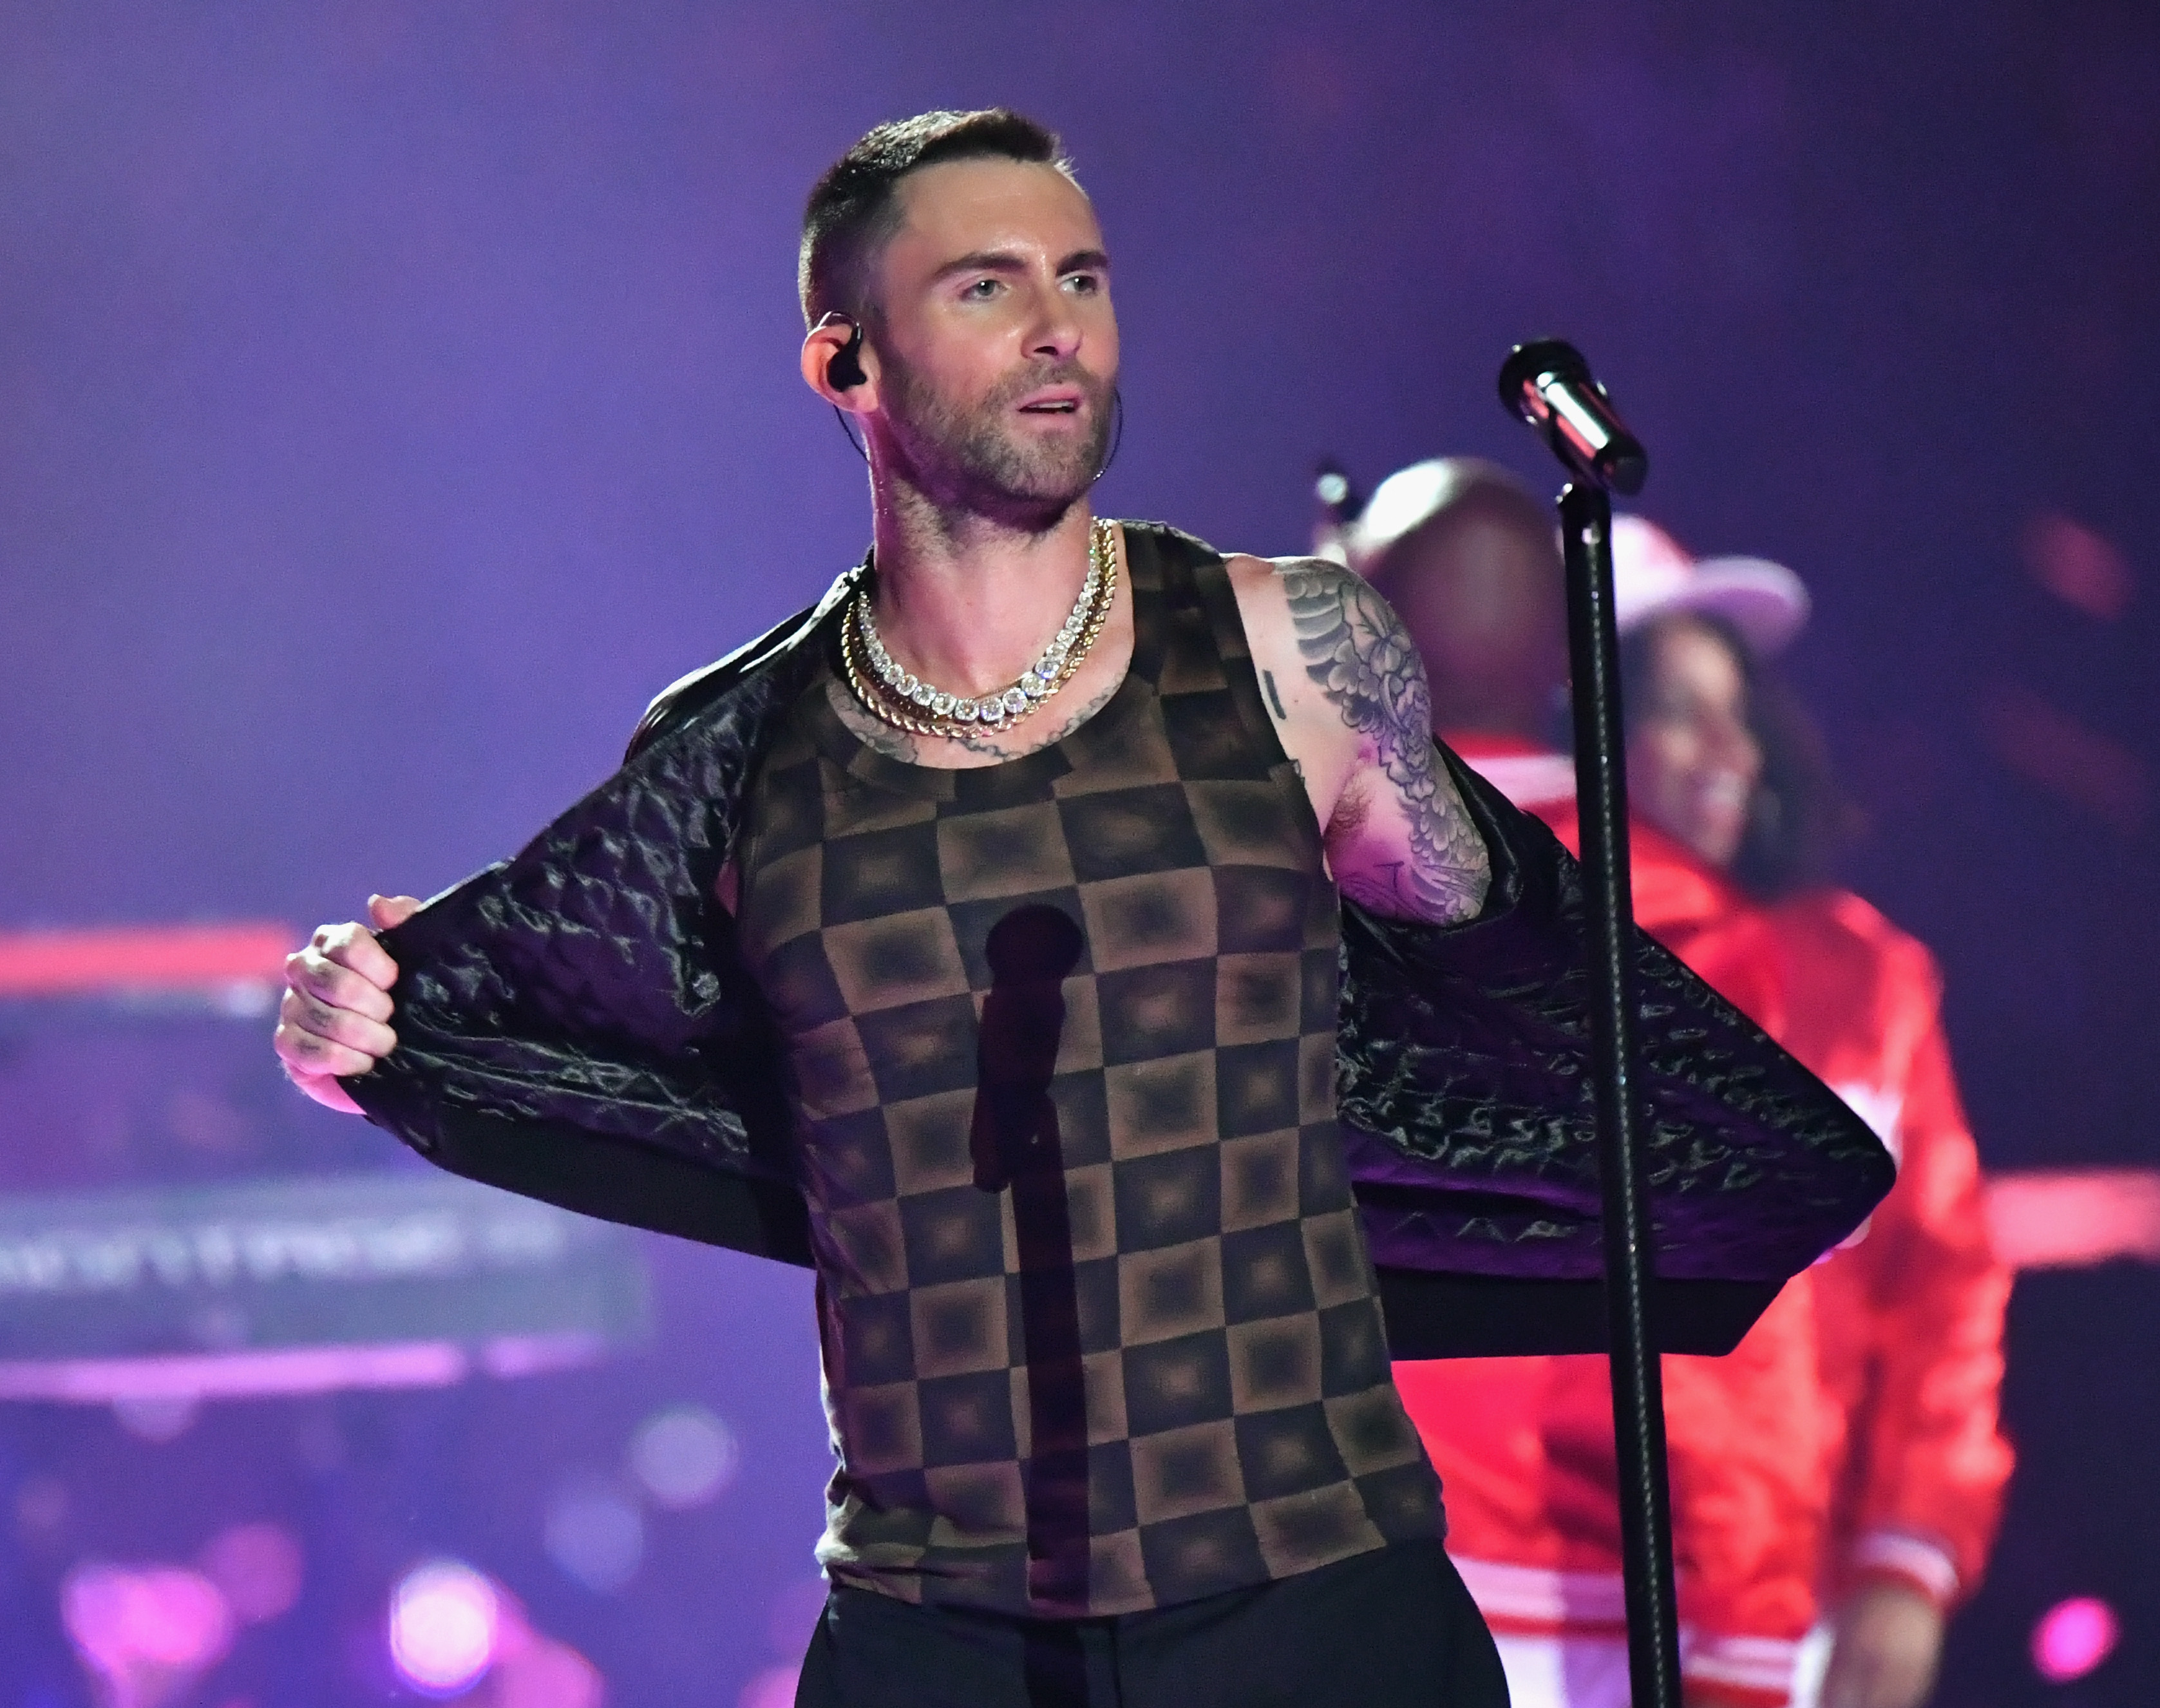 People Compare Adam Levine Super Bowl 2019 Shirt to Pillow | Time